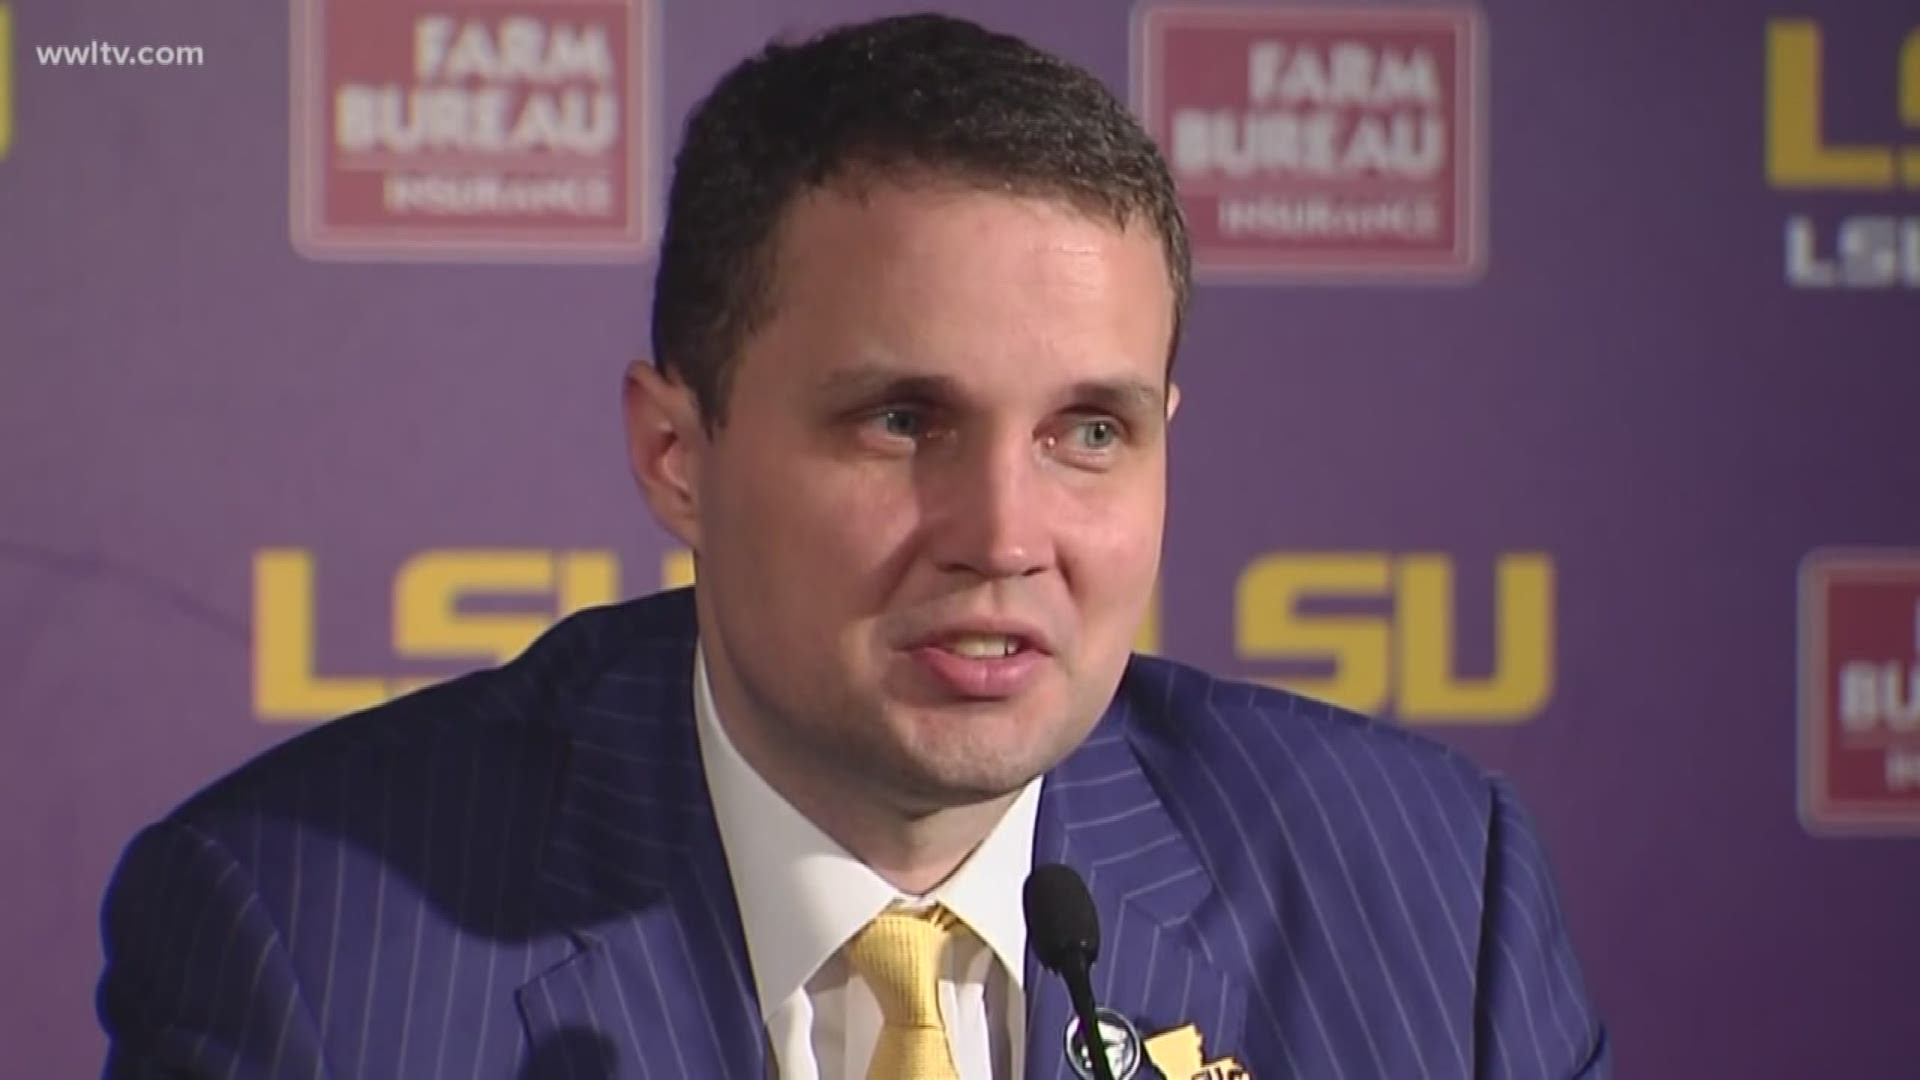 "I really hate that all of this has happened, I really like Will Wade, he's a great coach. I really think it happens to other schools," one fan said.